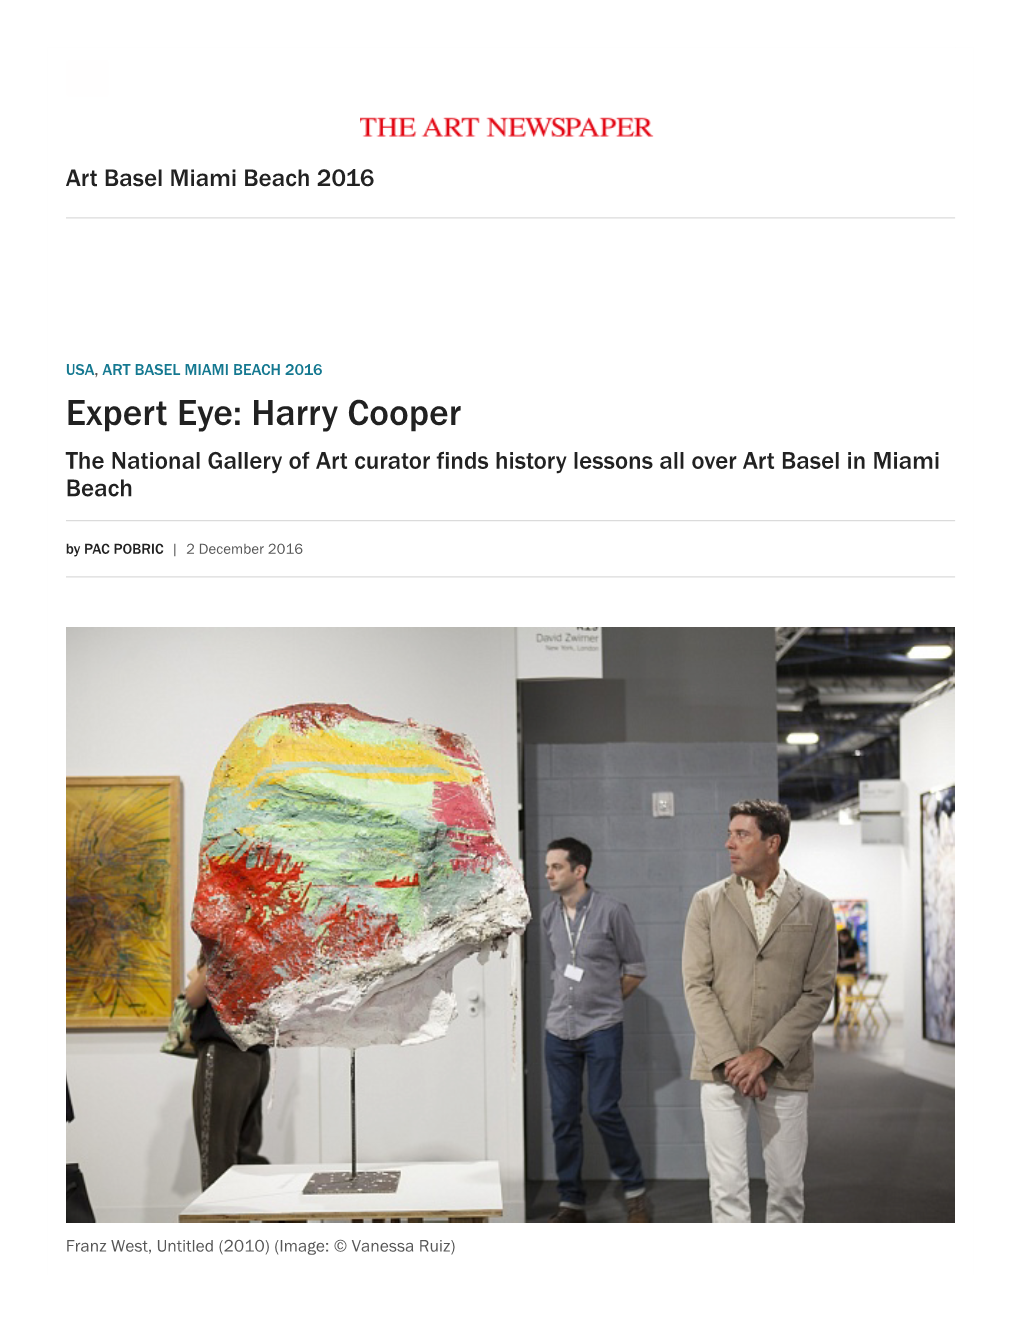 Harry Cooper the National Gallery of Art Curator Finds History Lessons All Over Art Basel in Miami Beach by PAC POBRIC  